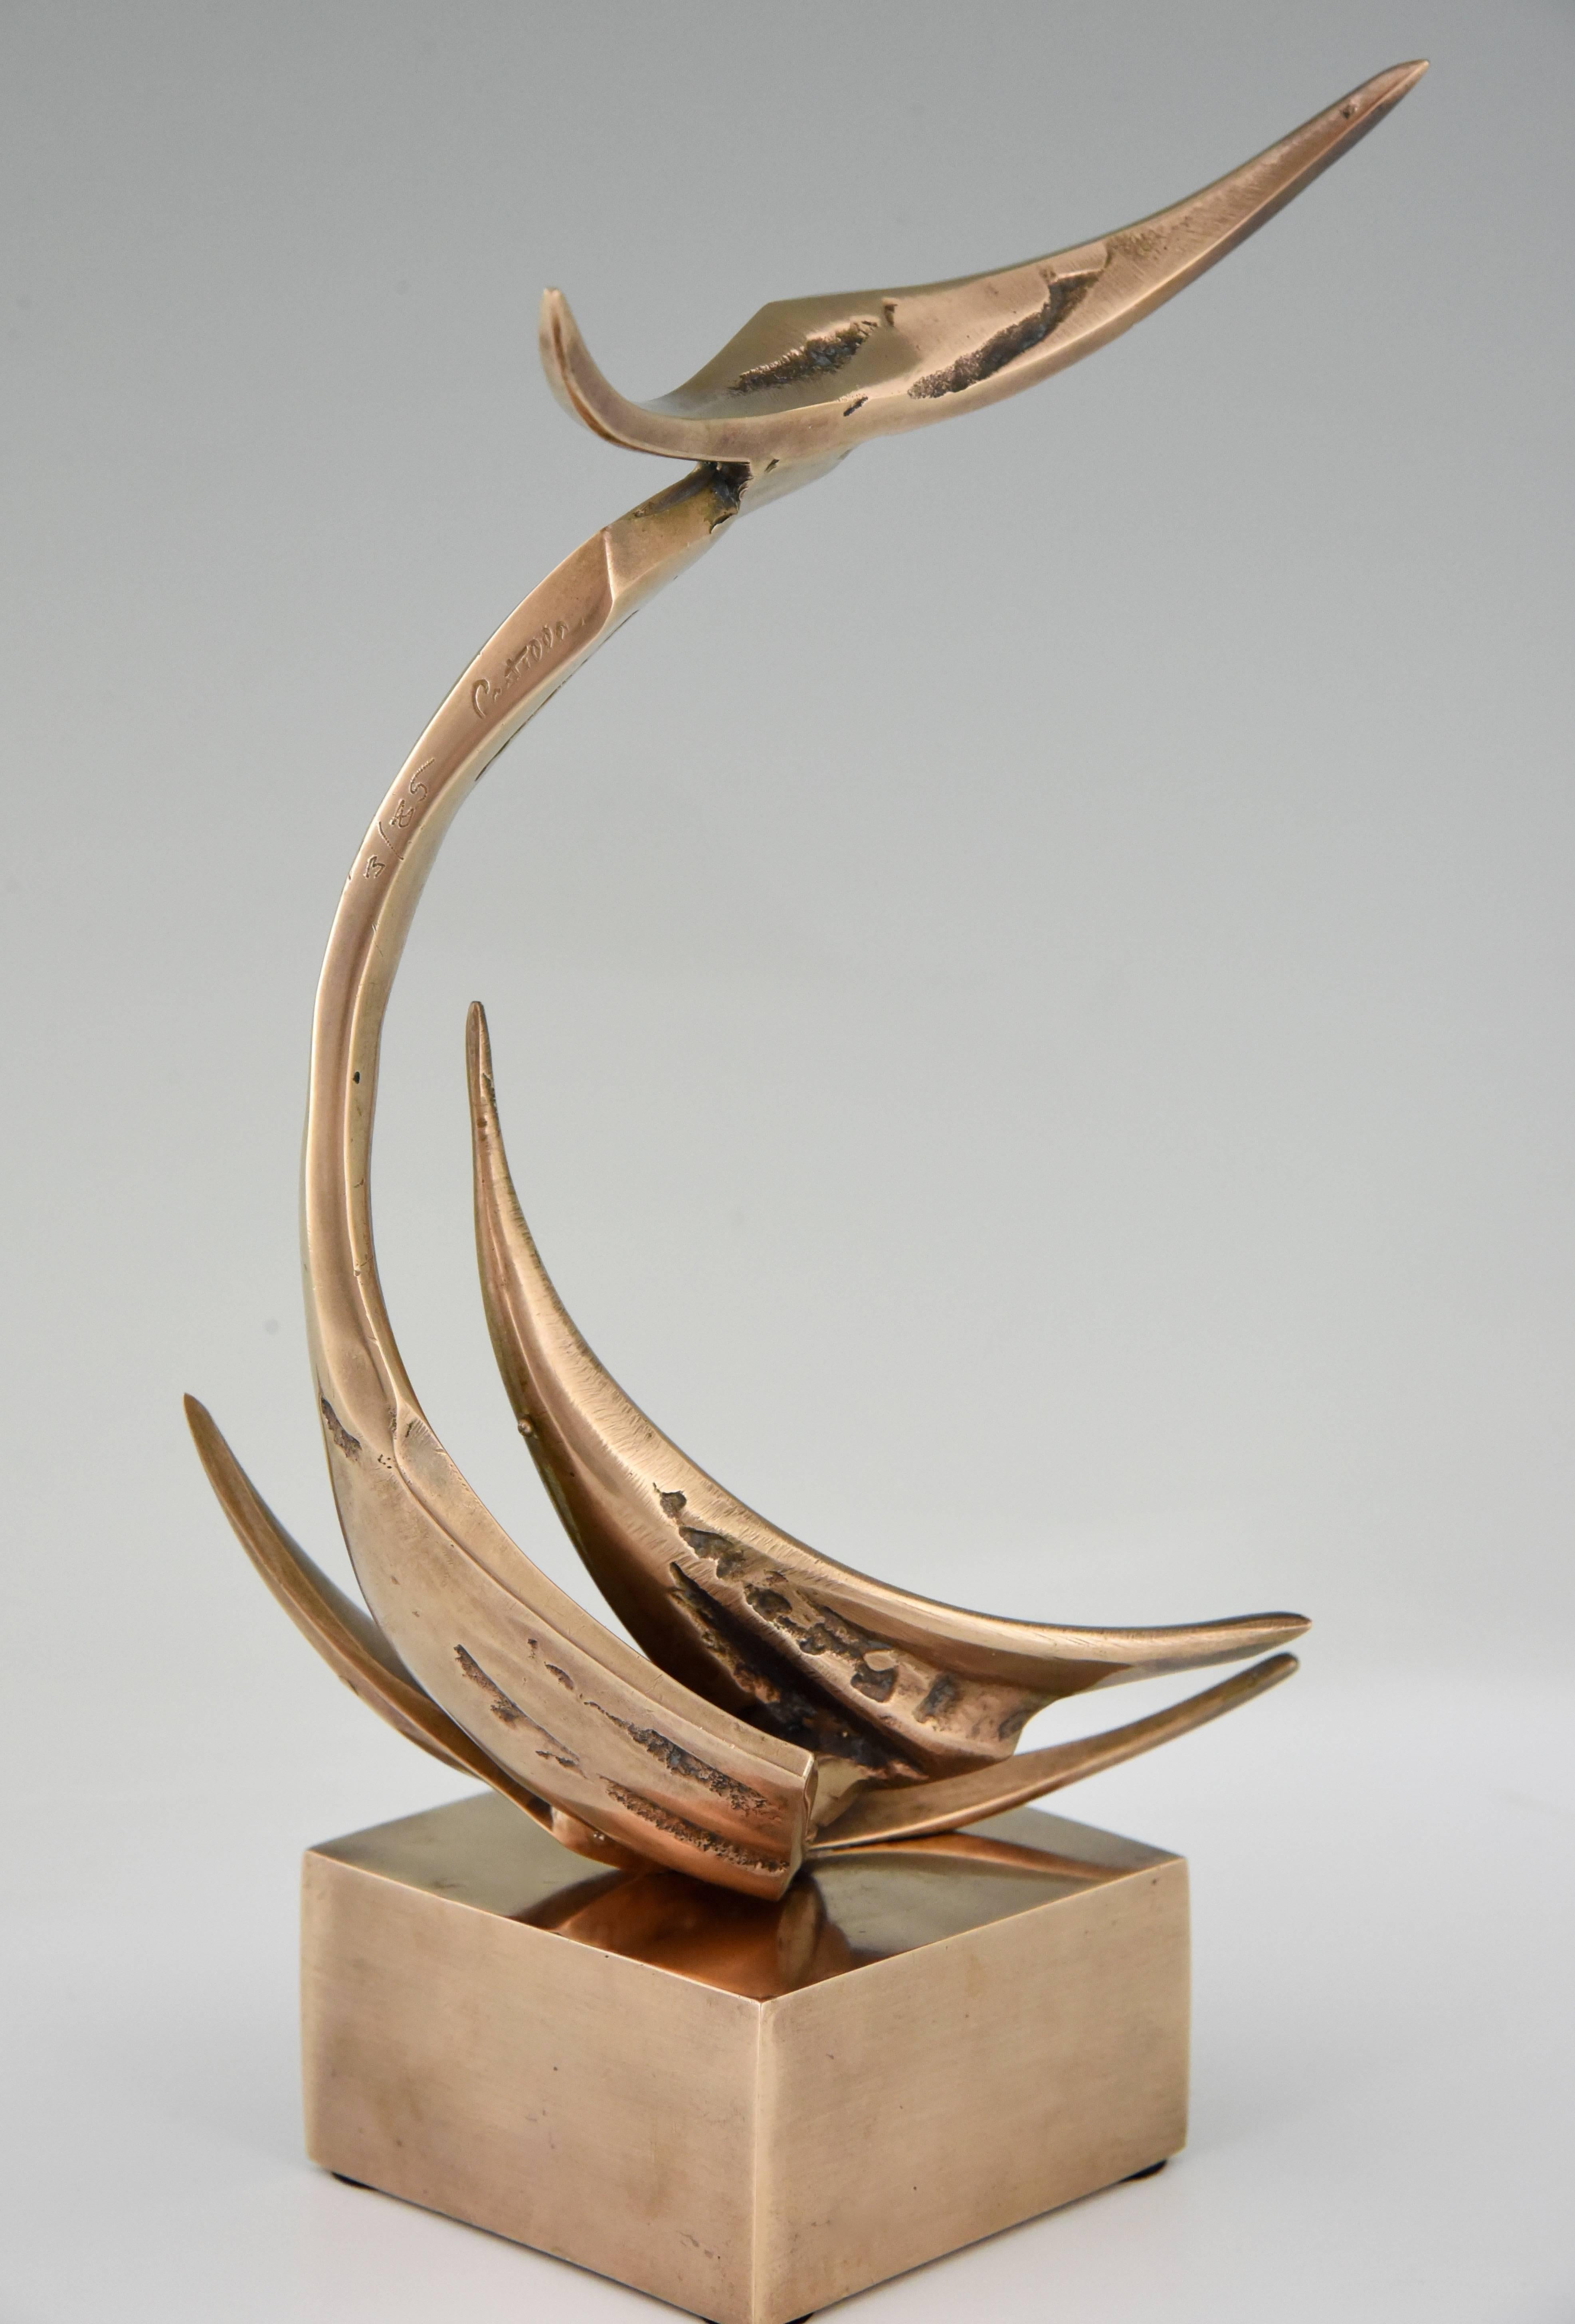 20th Century Abstract Bronze Sculpture by Jorge Castillo Signed and Numbered, Spain, 1970